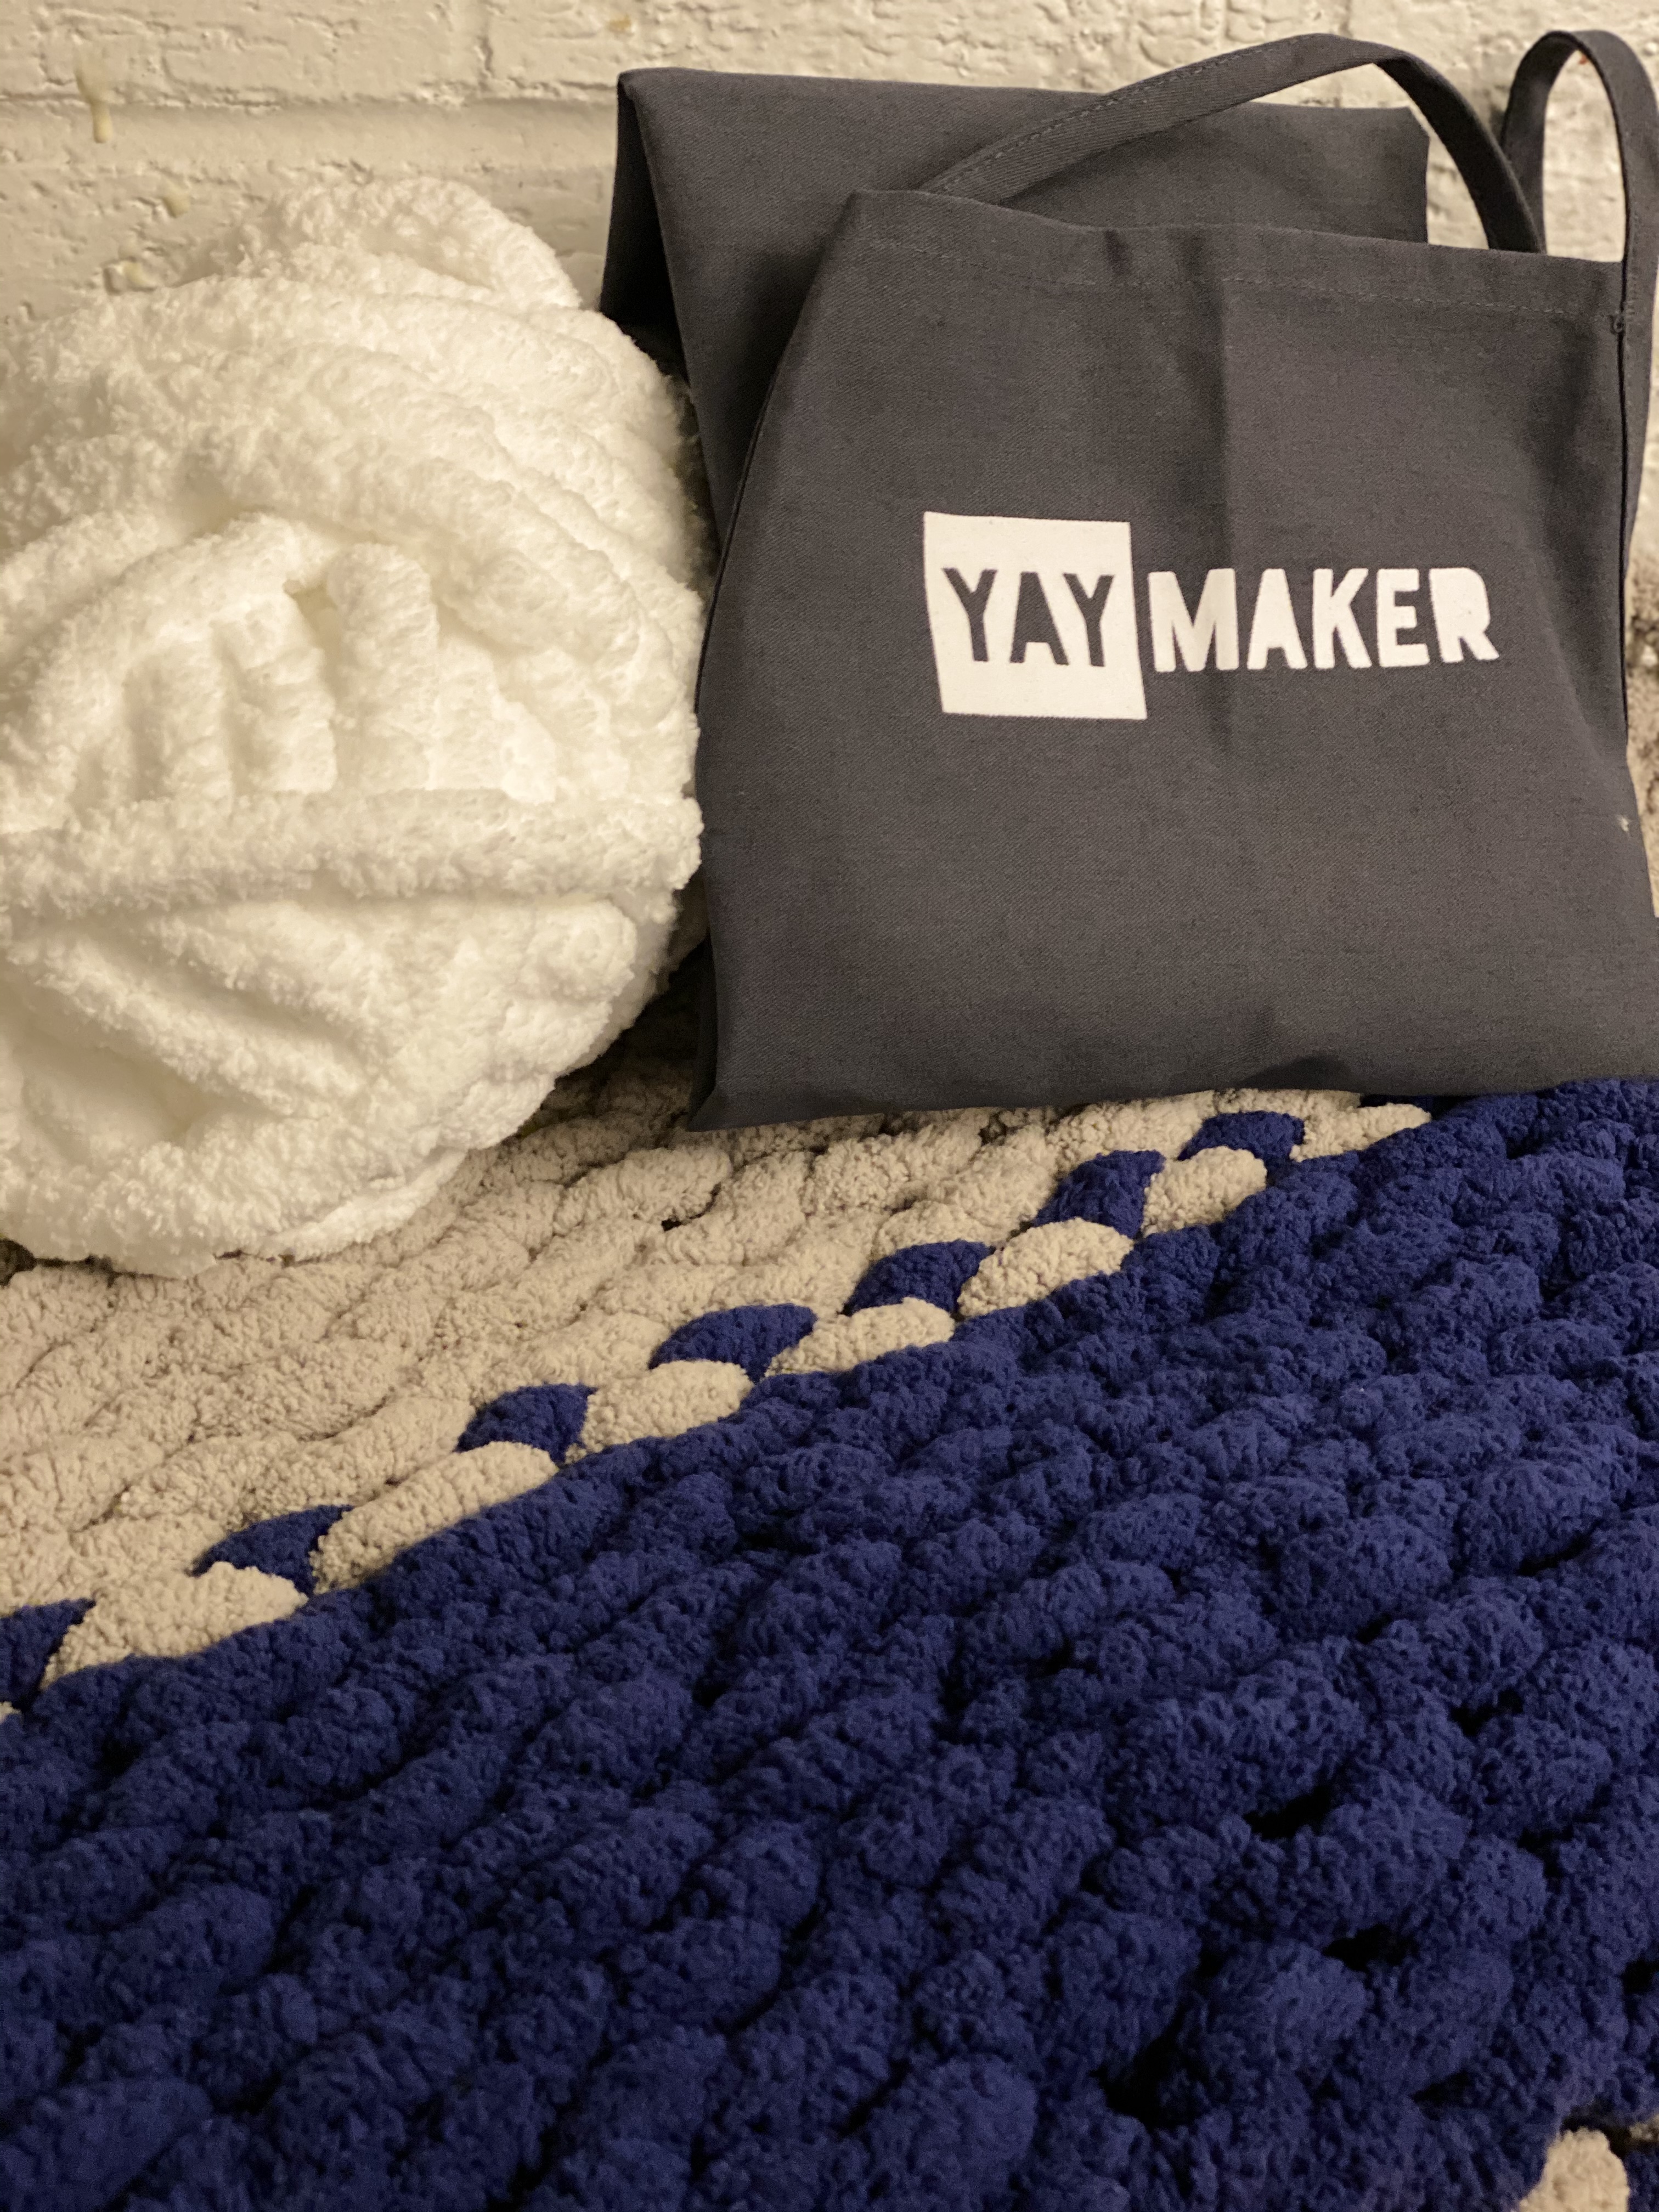 A Yaymaker Chunky Blanket Workshop Choose your colors experience project by Yaymaker